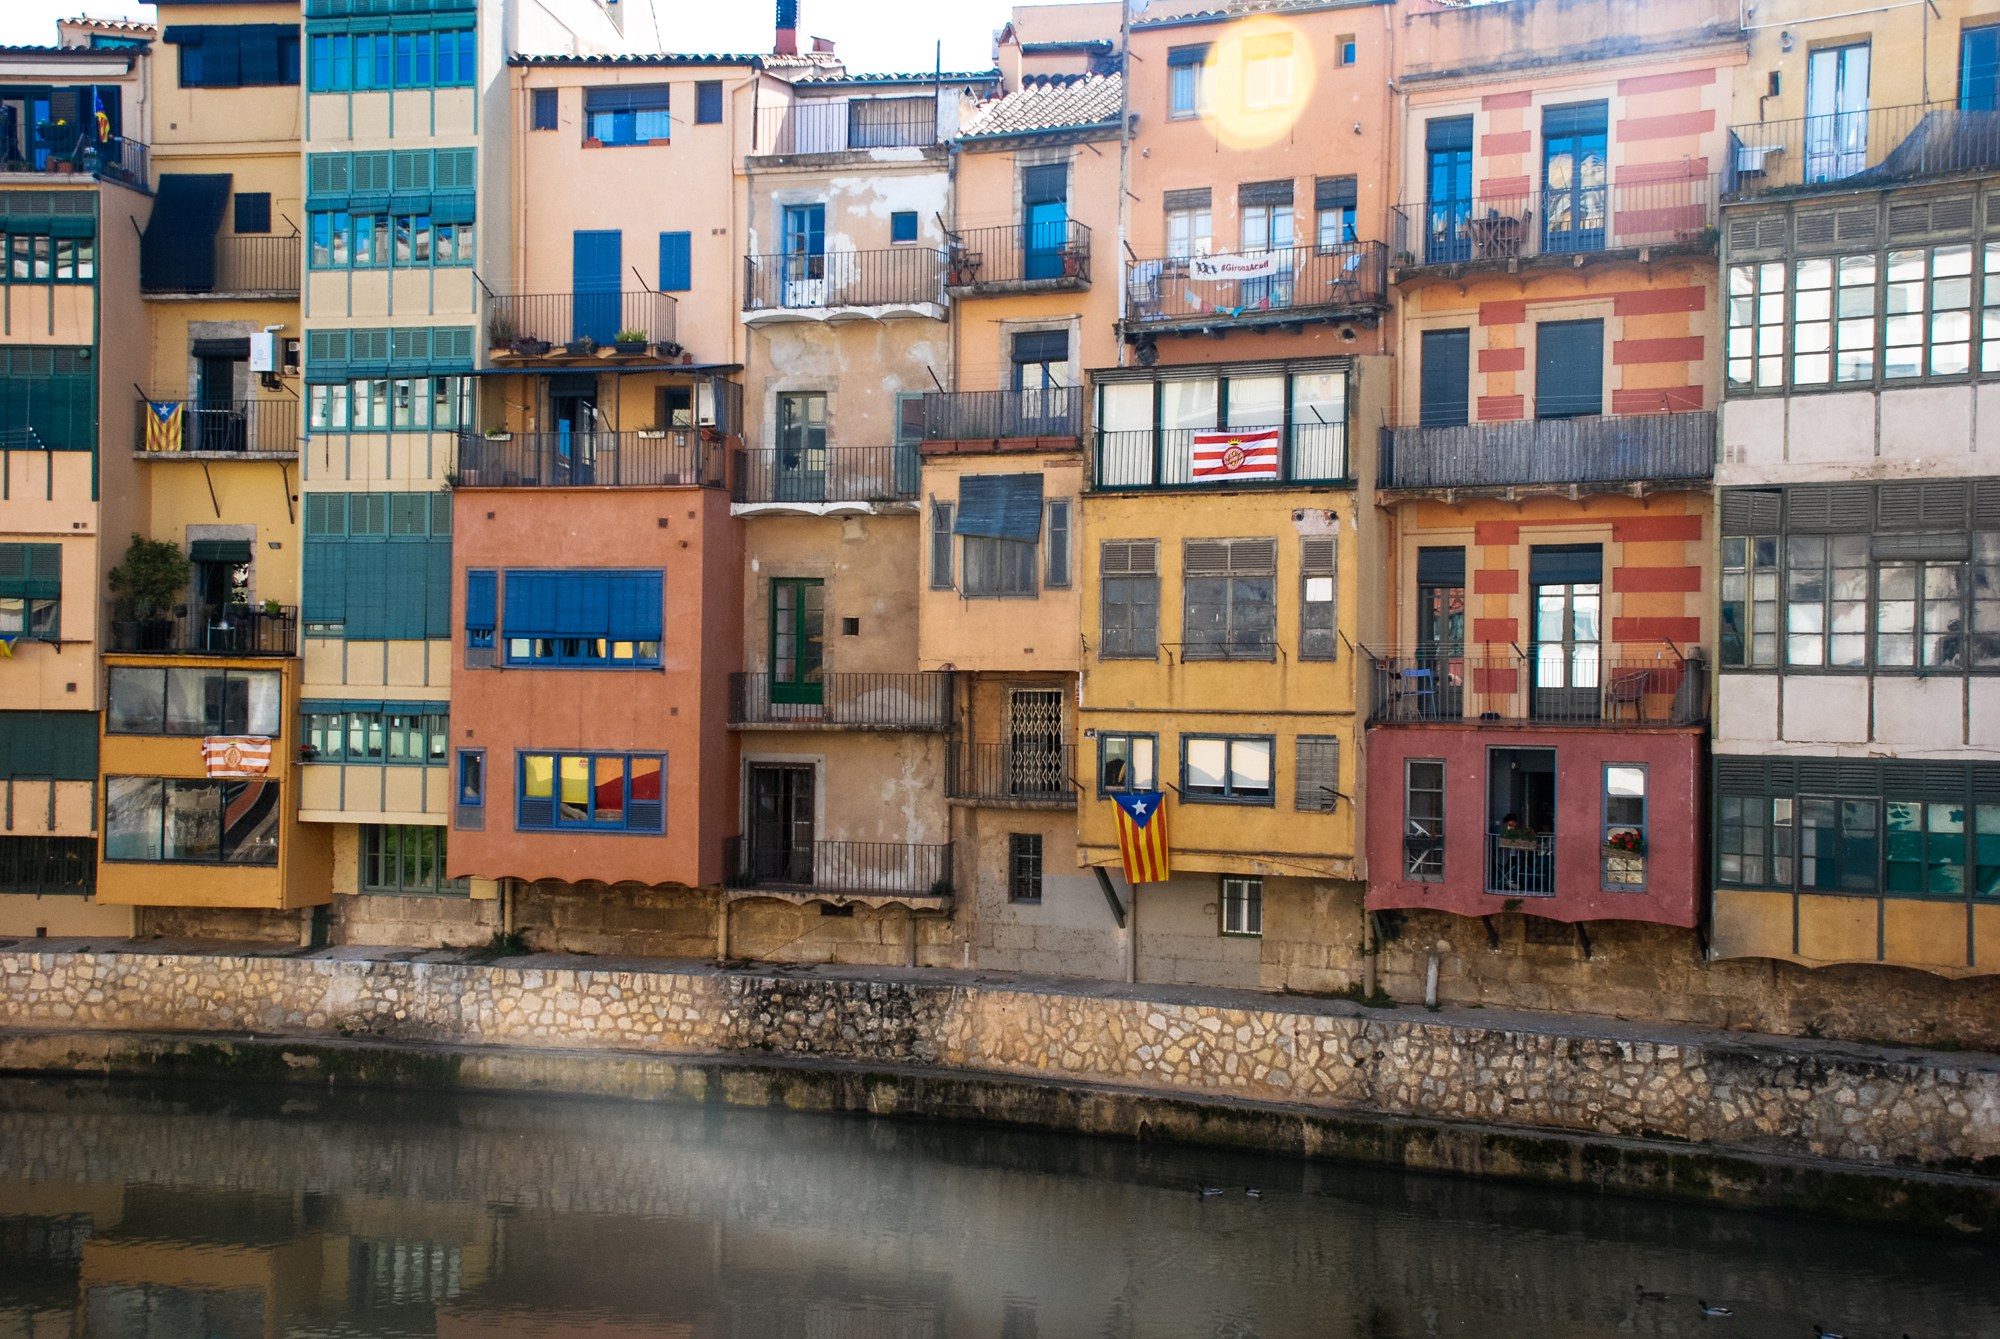 Pastel coloured buildings follow the curve of the Onyar River, Girona, Catalonia